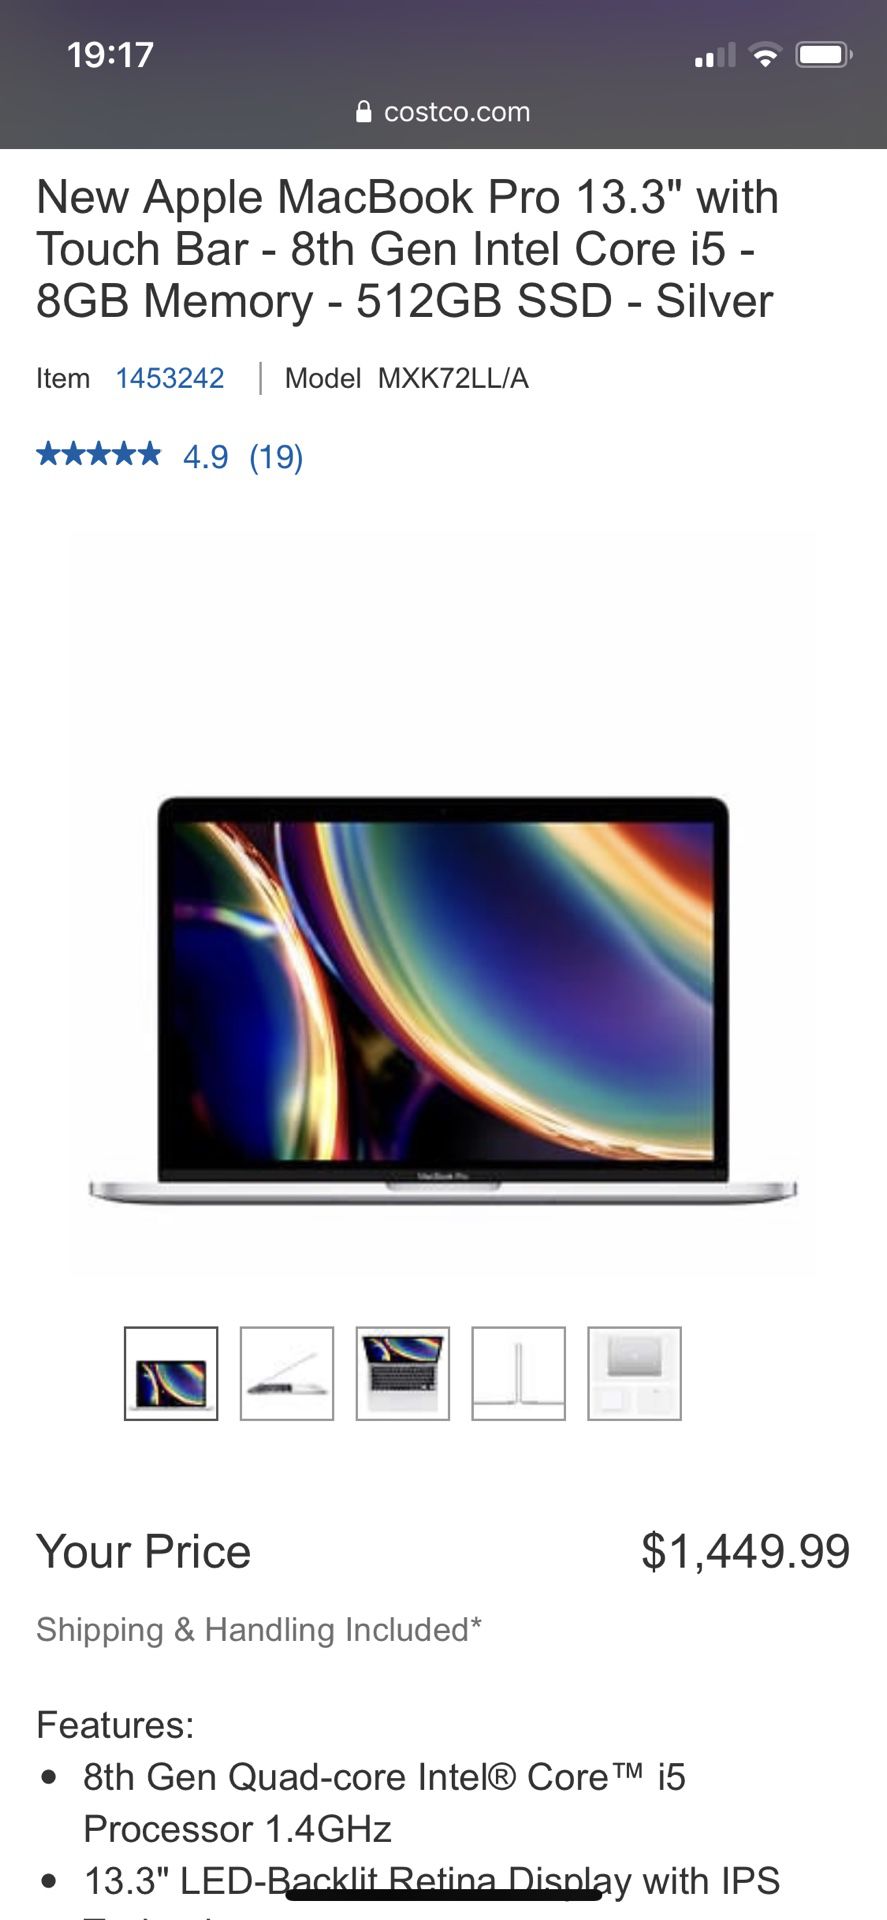 New Apple MacBook Pro 13.3" with Touch Bar - 8th Gen Intel Core i5 - 8GB Memory - 512GB SSD - Silver(Brand New Unopened/Unboxed)